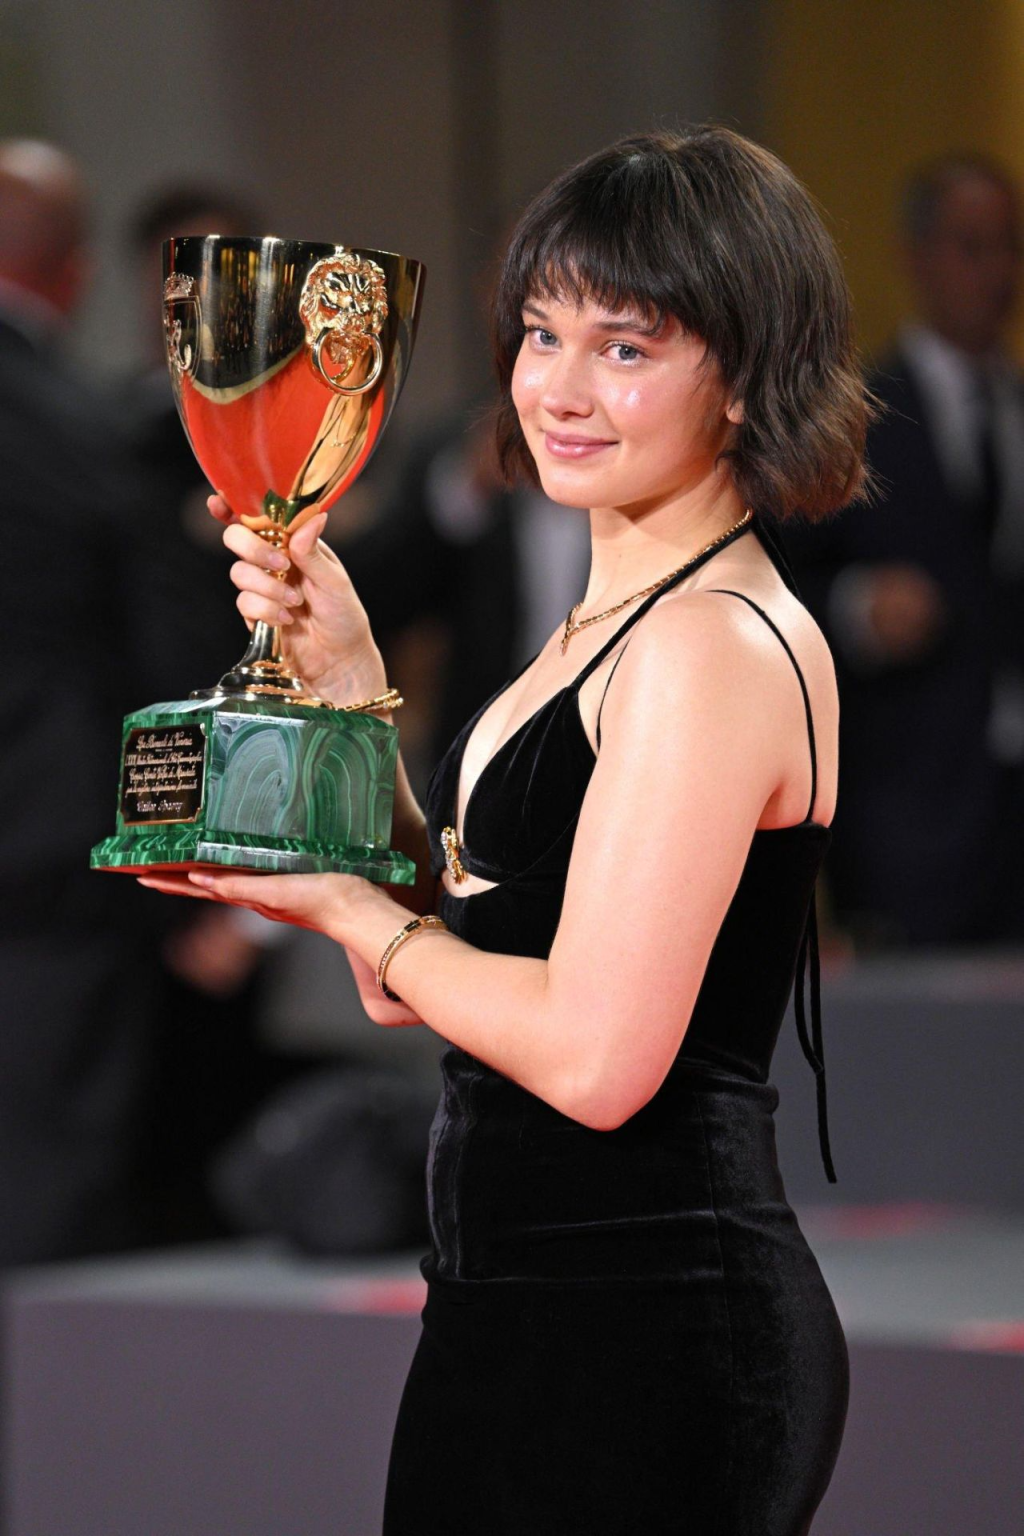 Cailee Spaeny wins Venice best actress for ‘Priscilla’